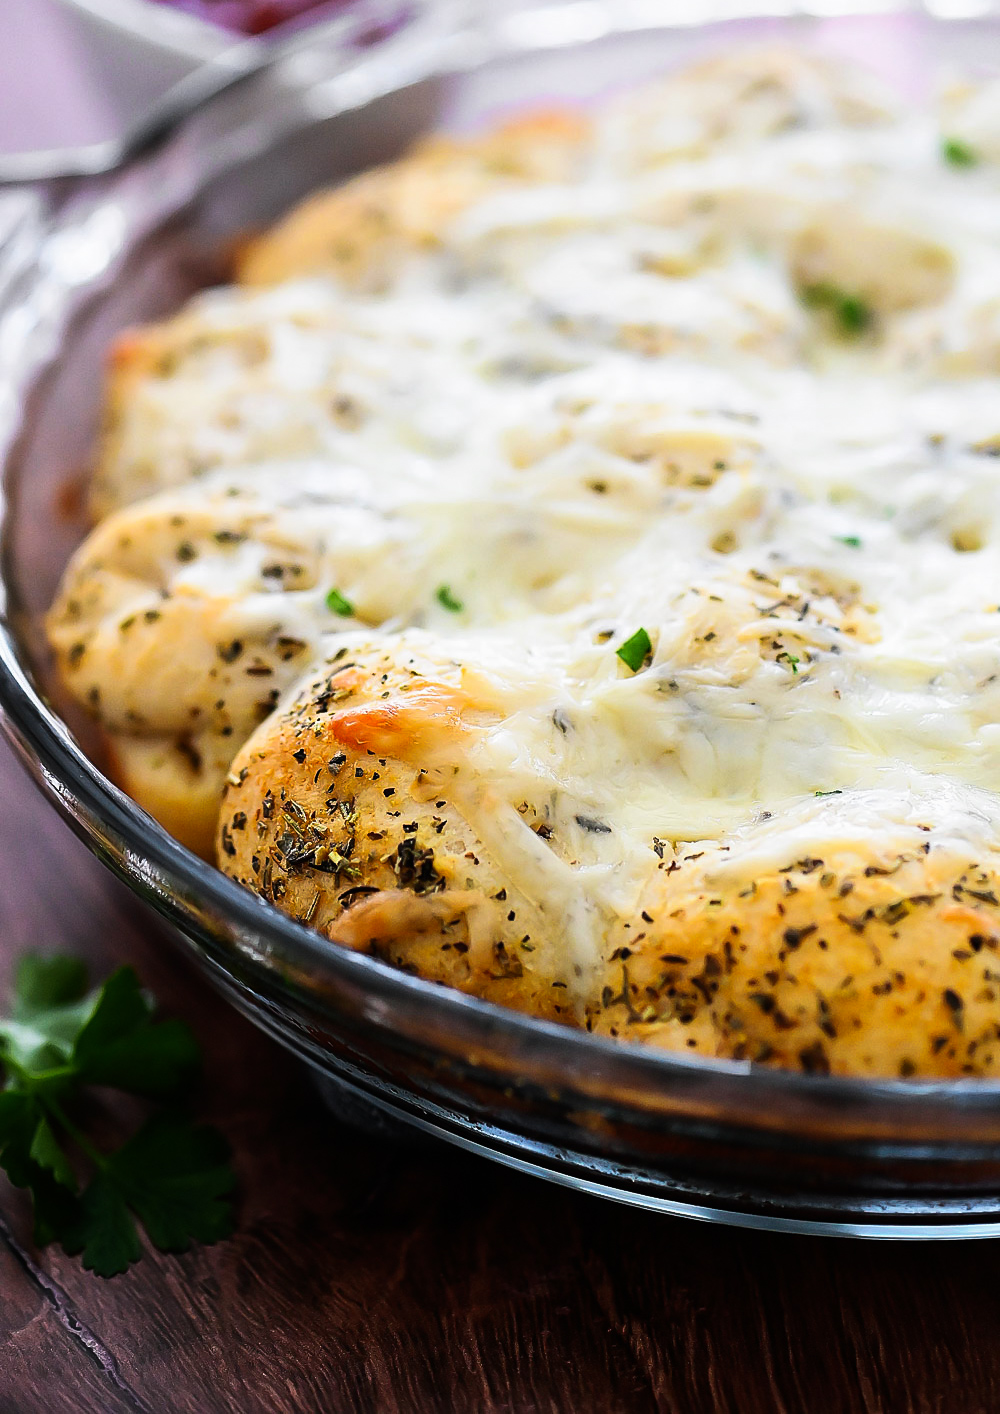 Cheesy Garlic Pull Apart Rolls are buttermilk biscuits covered in melted Mozzarella cheese, herbs and garlic butter.